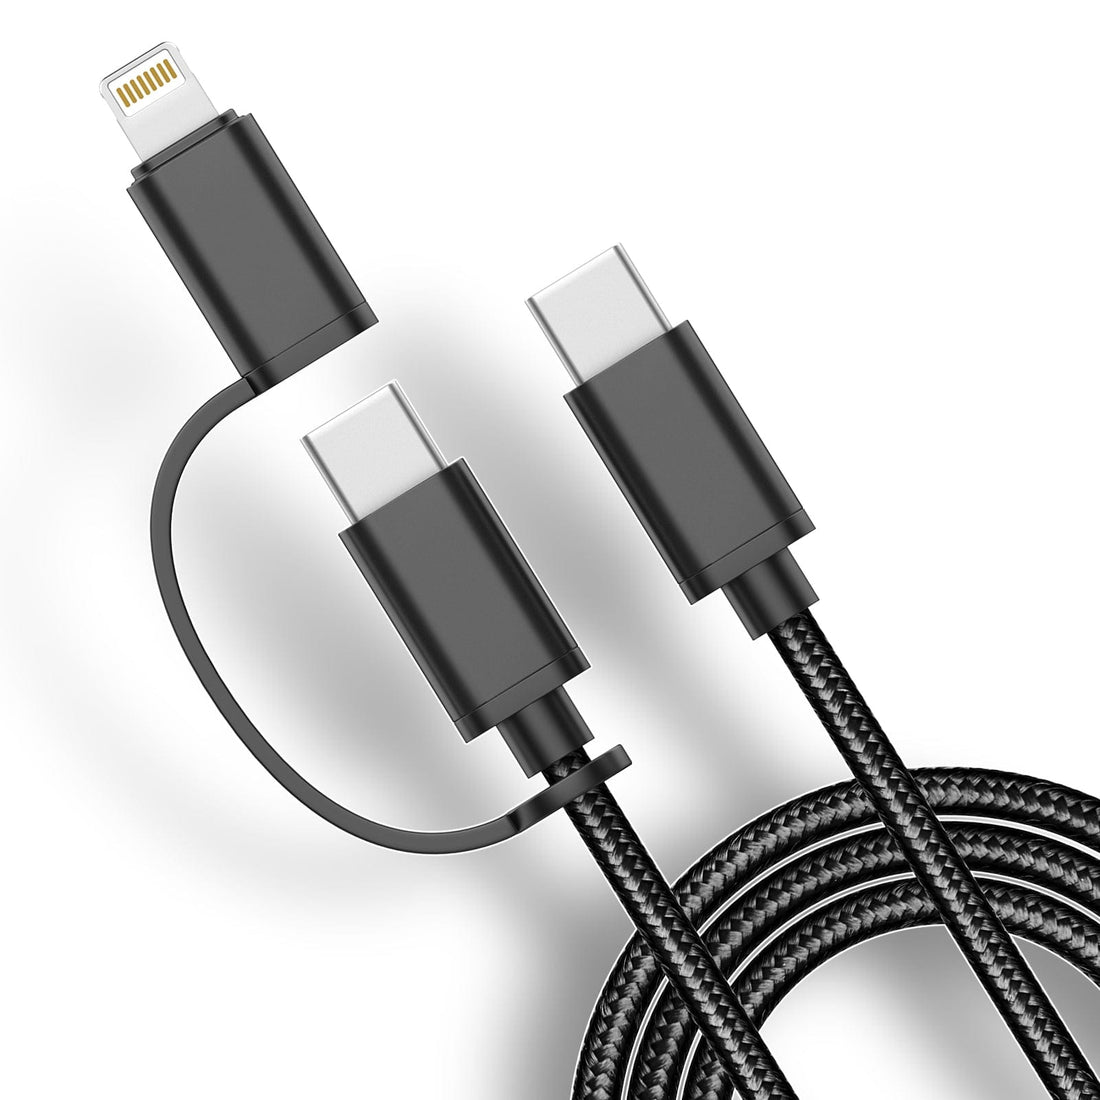 UK Technology 2-in-1 Charging Cable close up of the USB C to USB C + Lightning ends